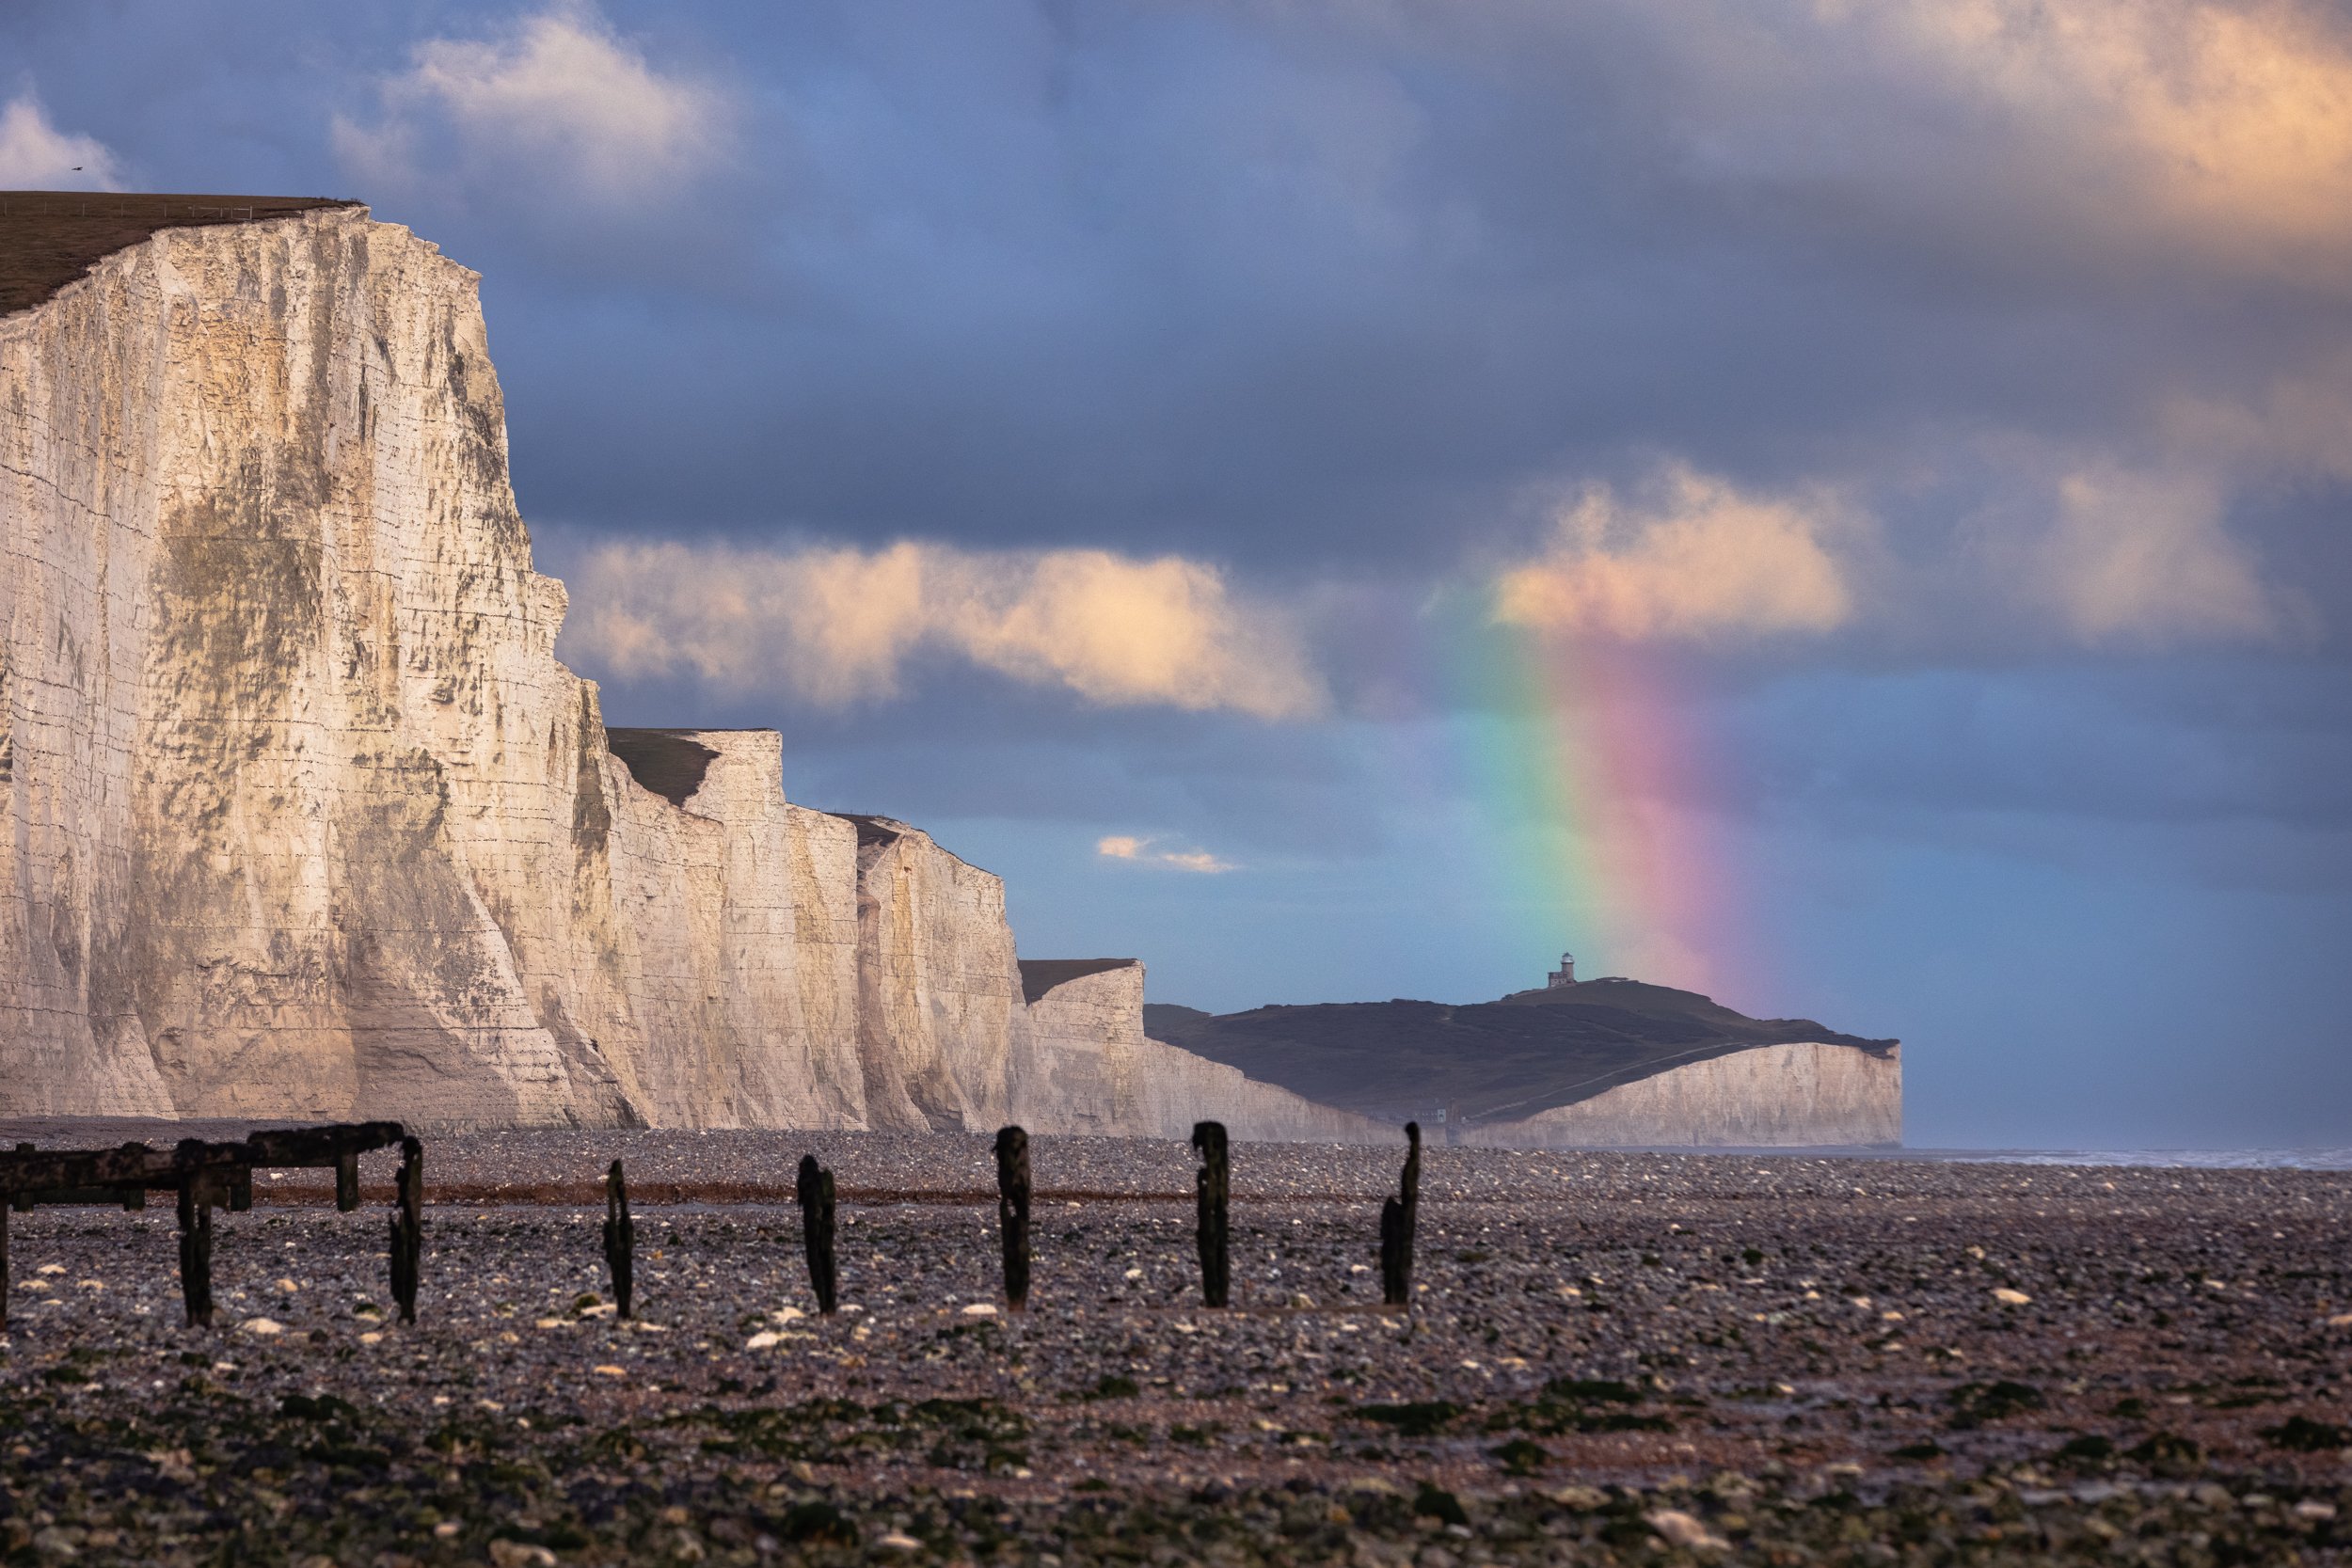 Rainbow over the Seven Sisters Cliffs